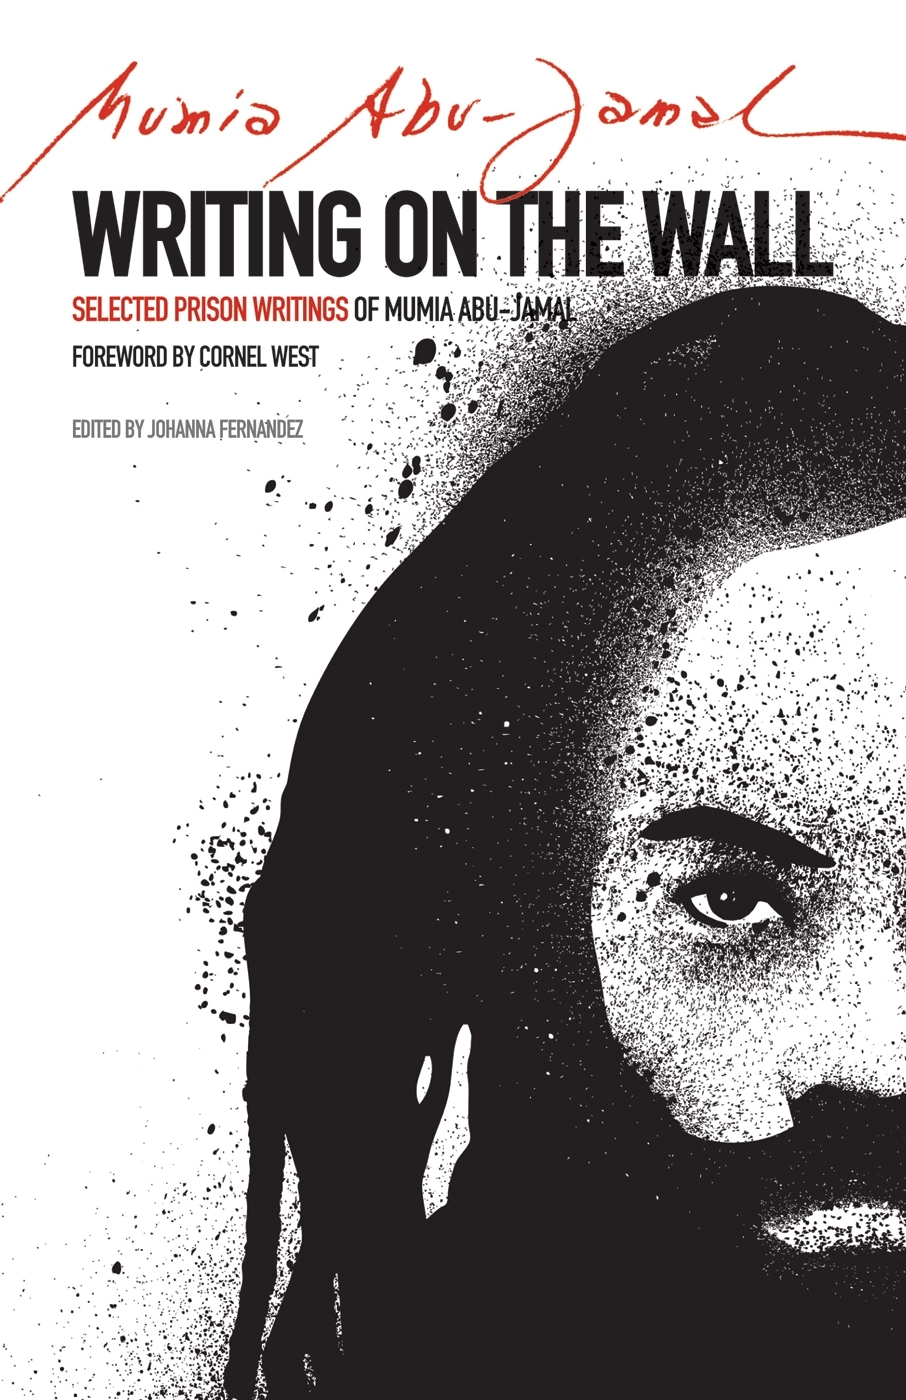 Book Event: Writing on the Wall; Selected Prison Writings of Mumia Abu-Jamal